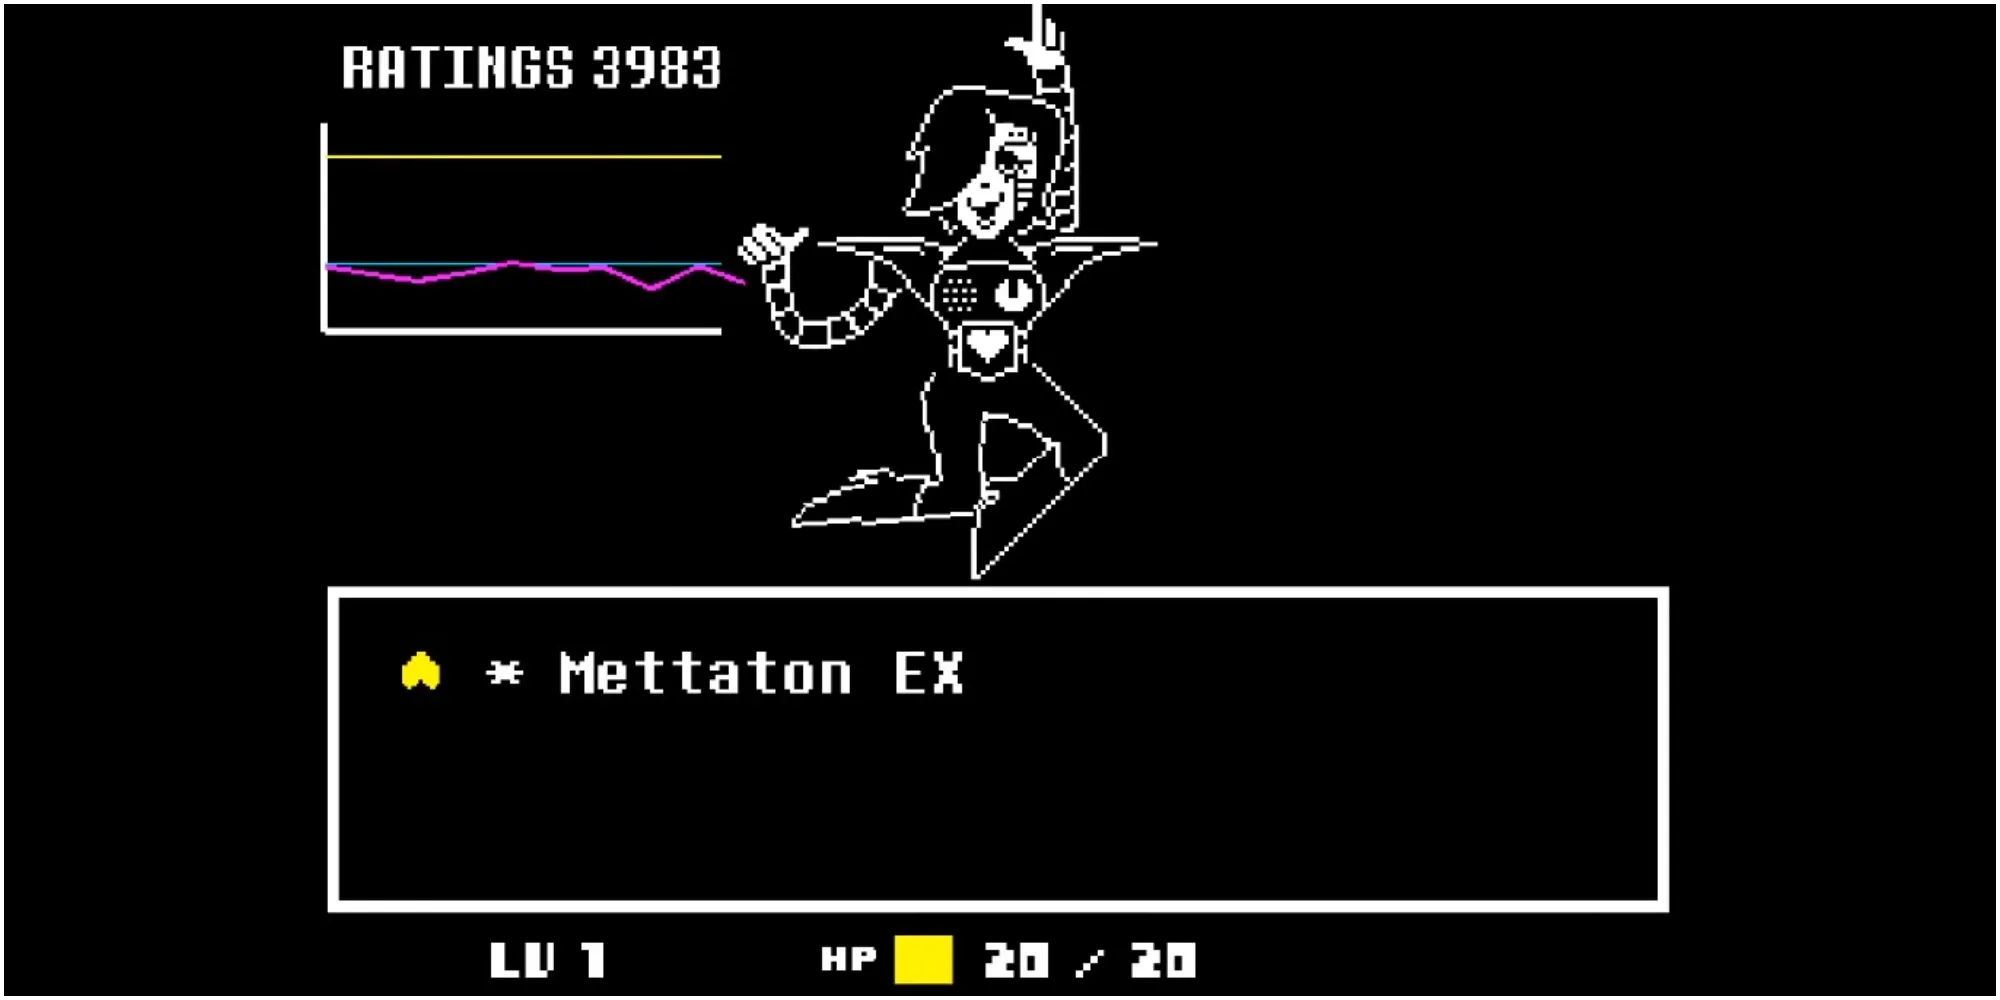 Mettaton Ex making his first appearance with the ratings going up.